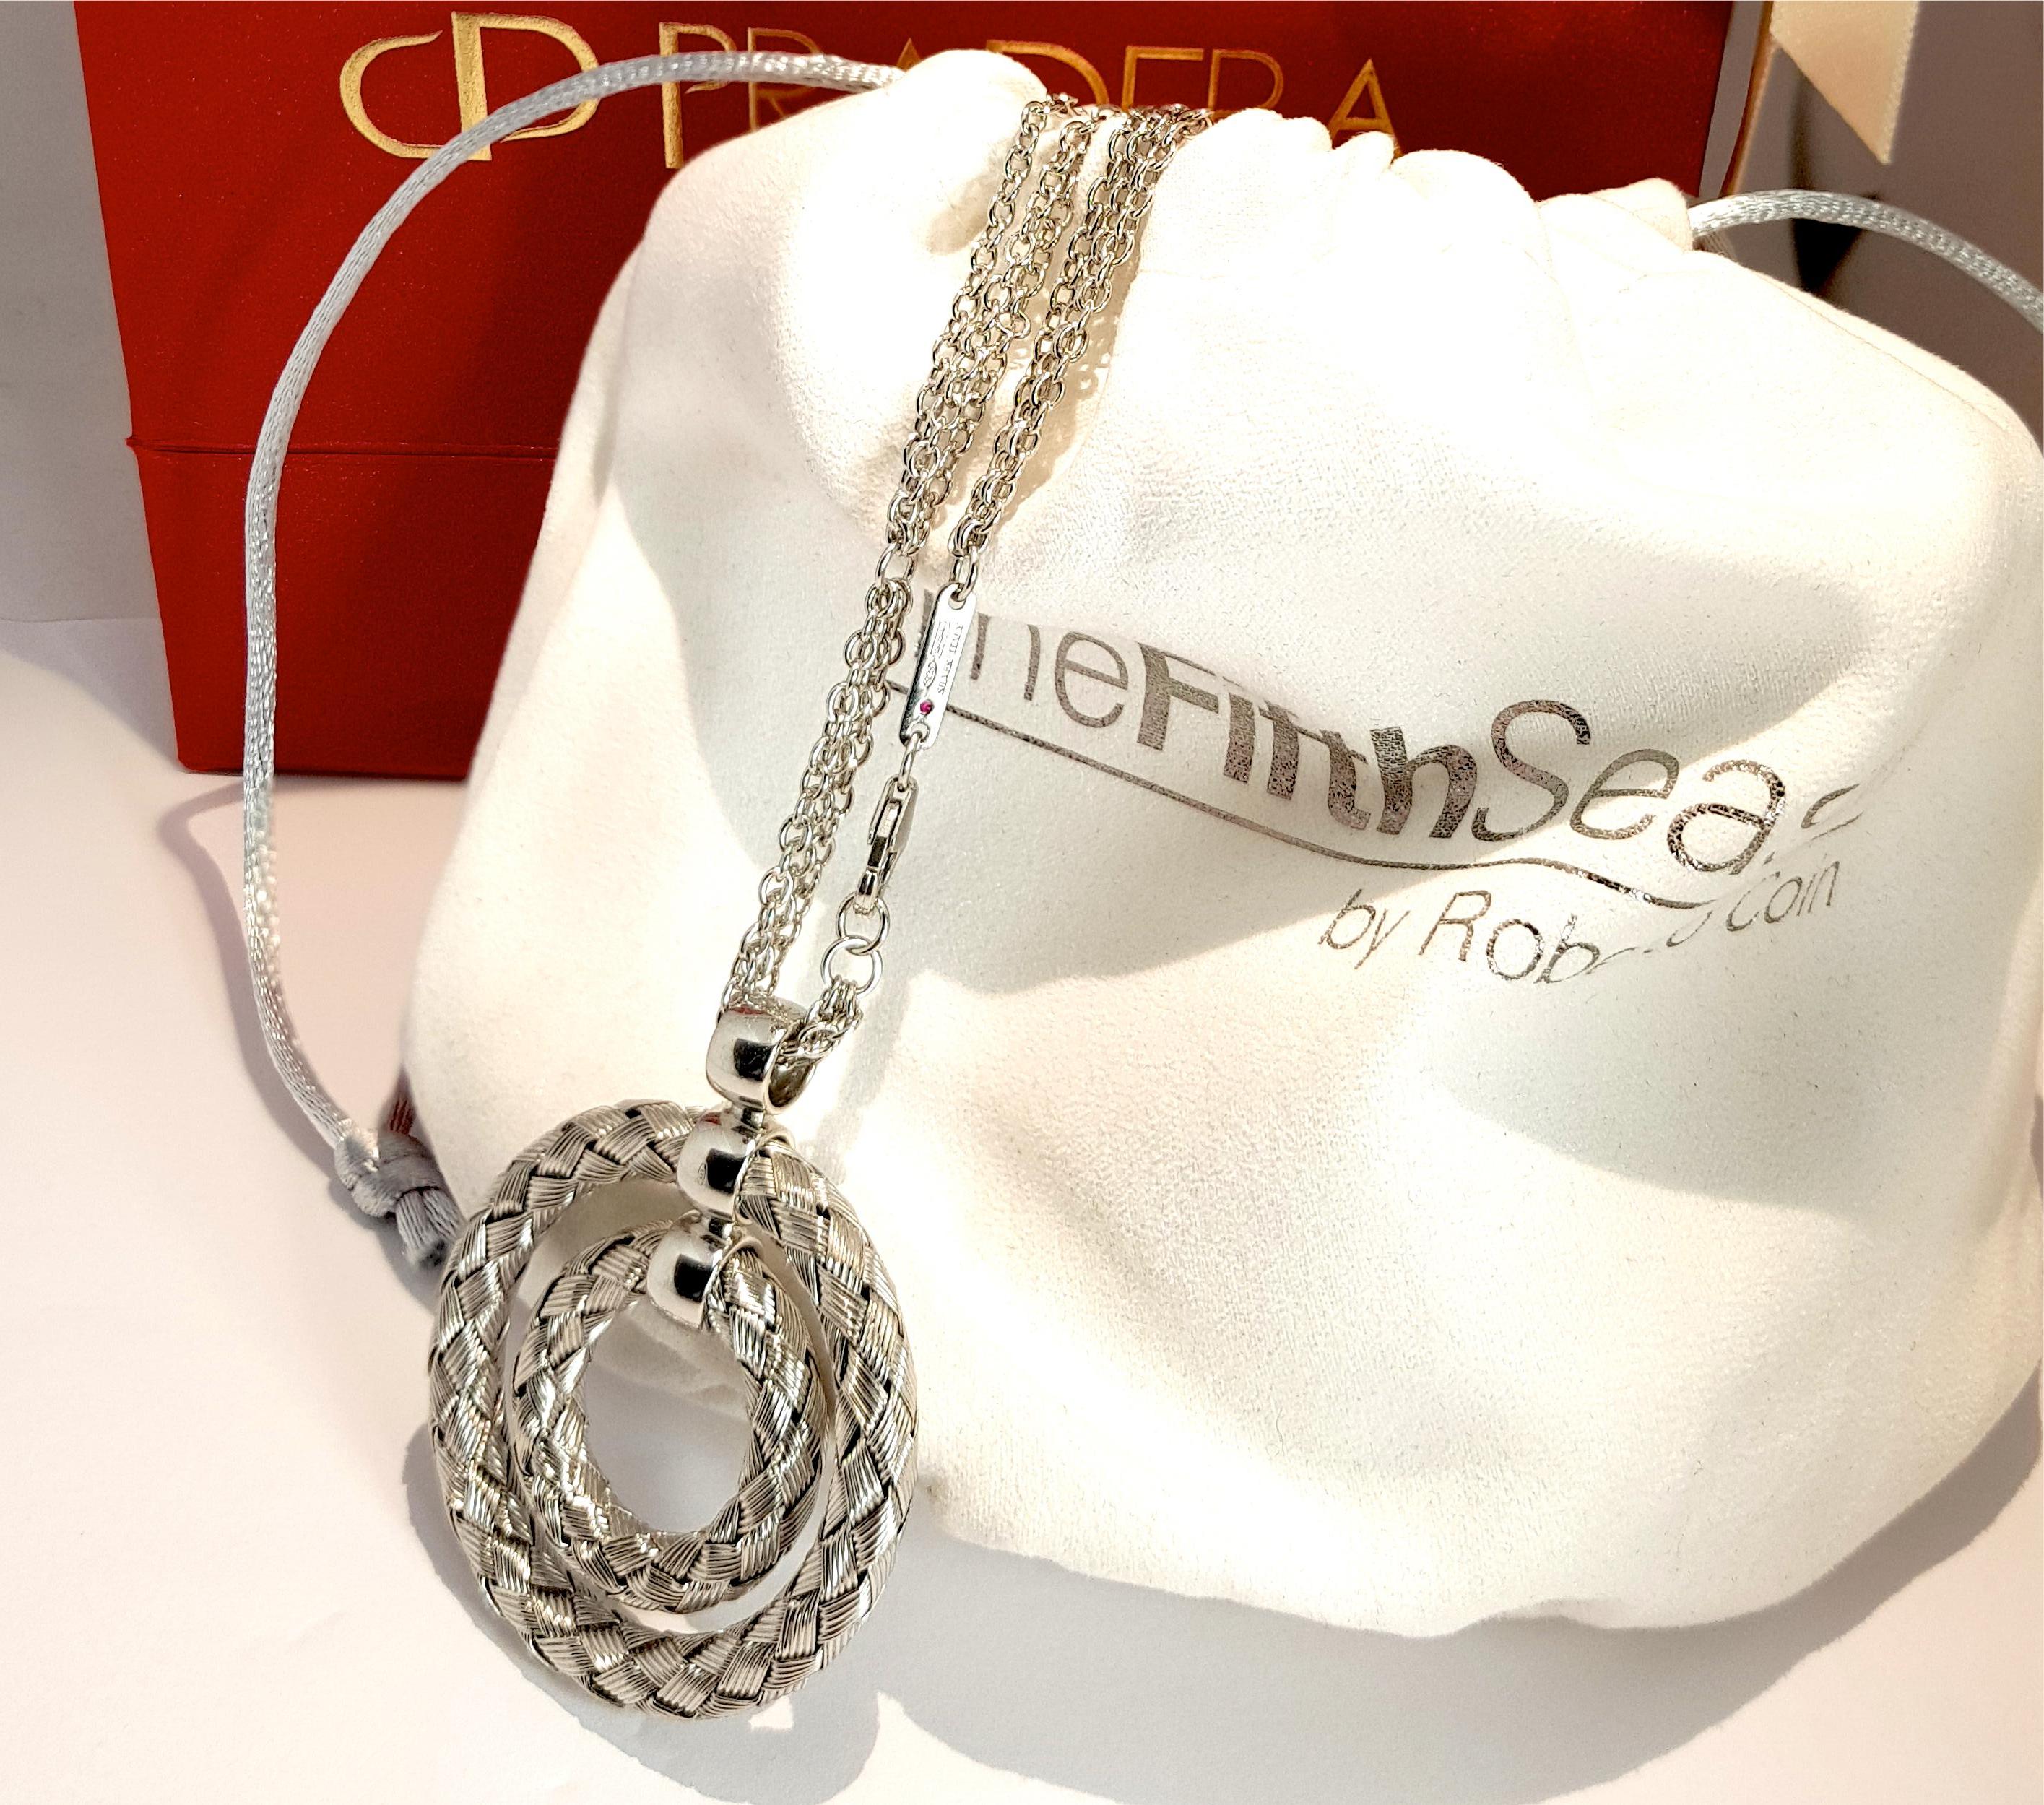 READY TO SHIP
*Shipment of this piece is not affected by COVID-19. Orders welcome!*
◘ Triple silver necklace chain, Length 45mm / 1.77 inches
◘ Silver pendant weight total with chain 26,50

In 1996, a jewelry collection was signed with a small ruby